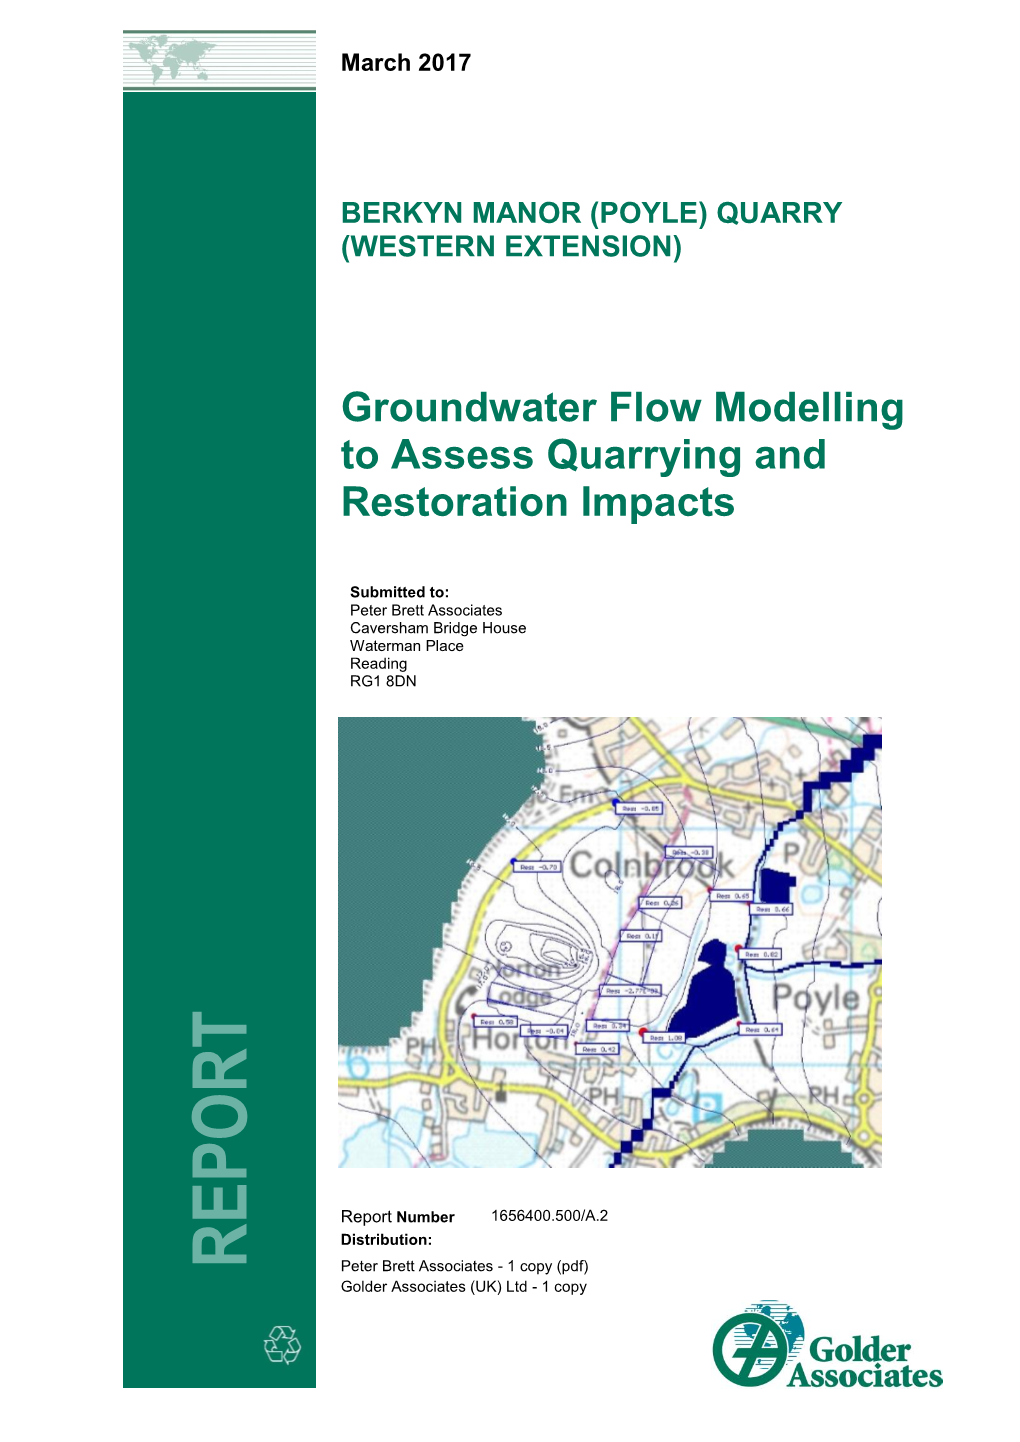 Groundwater Flow Modelling to Assess Quarrying and Restoration Impacts